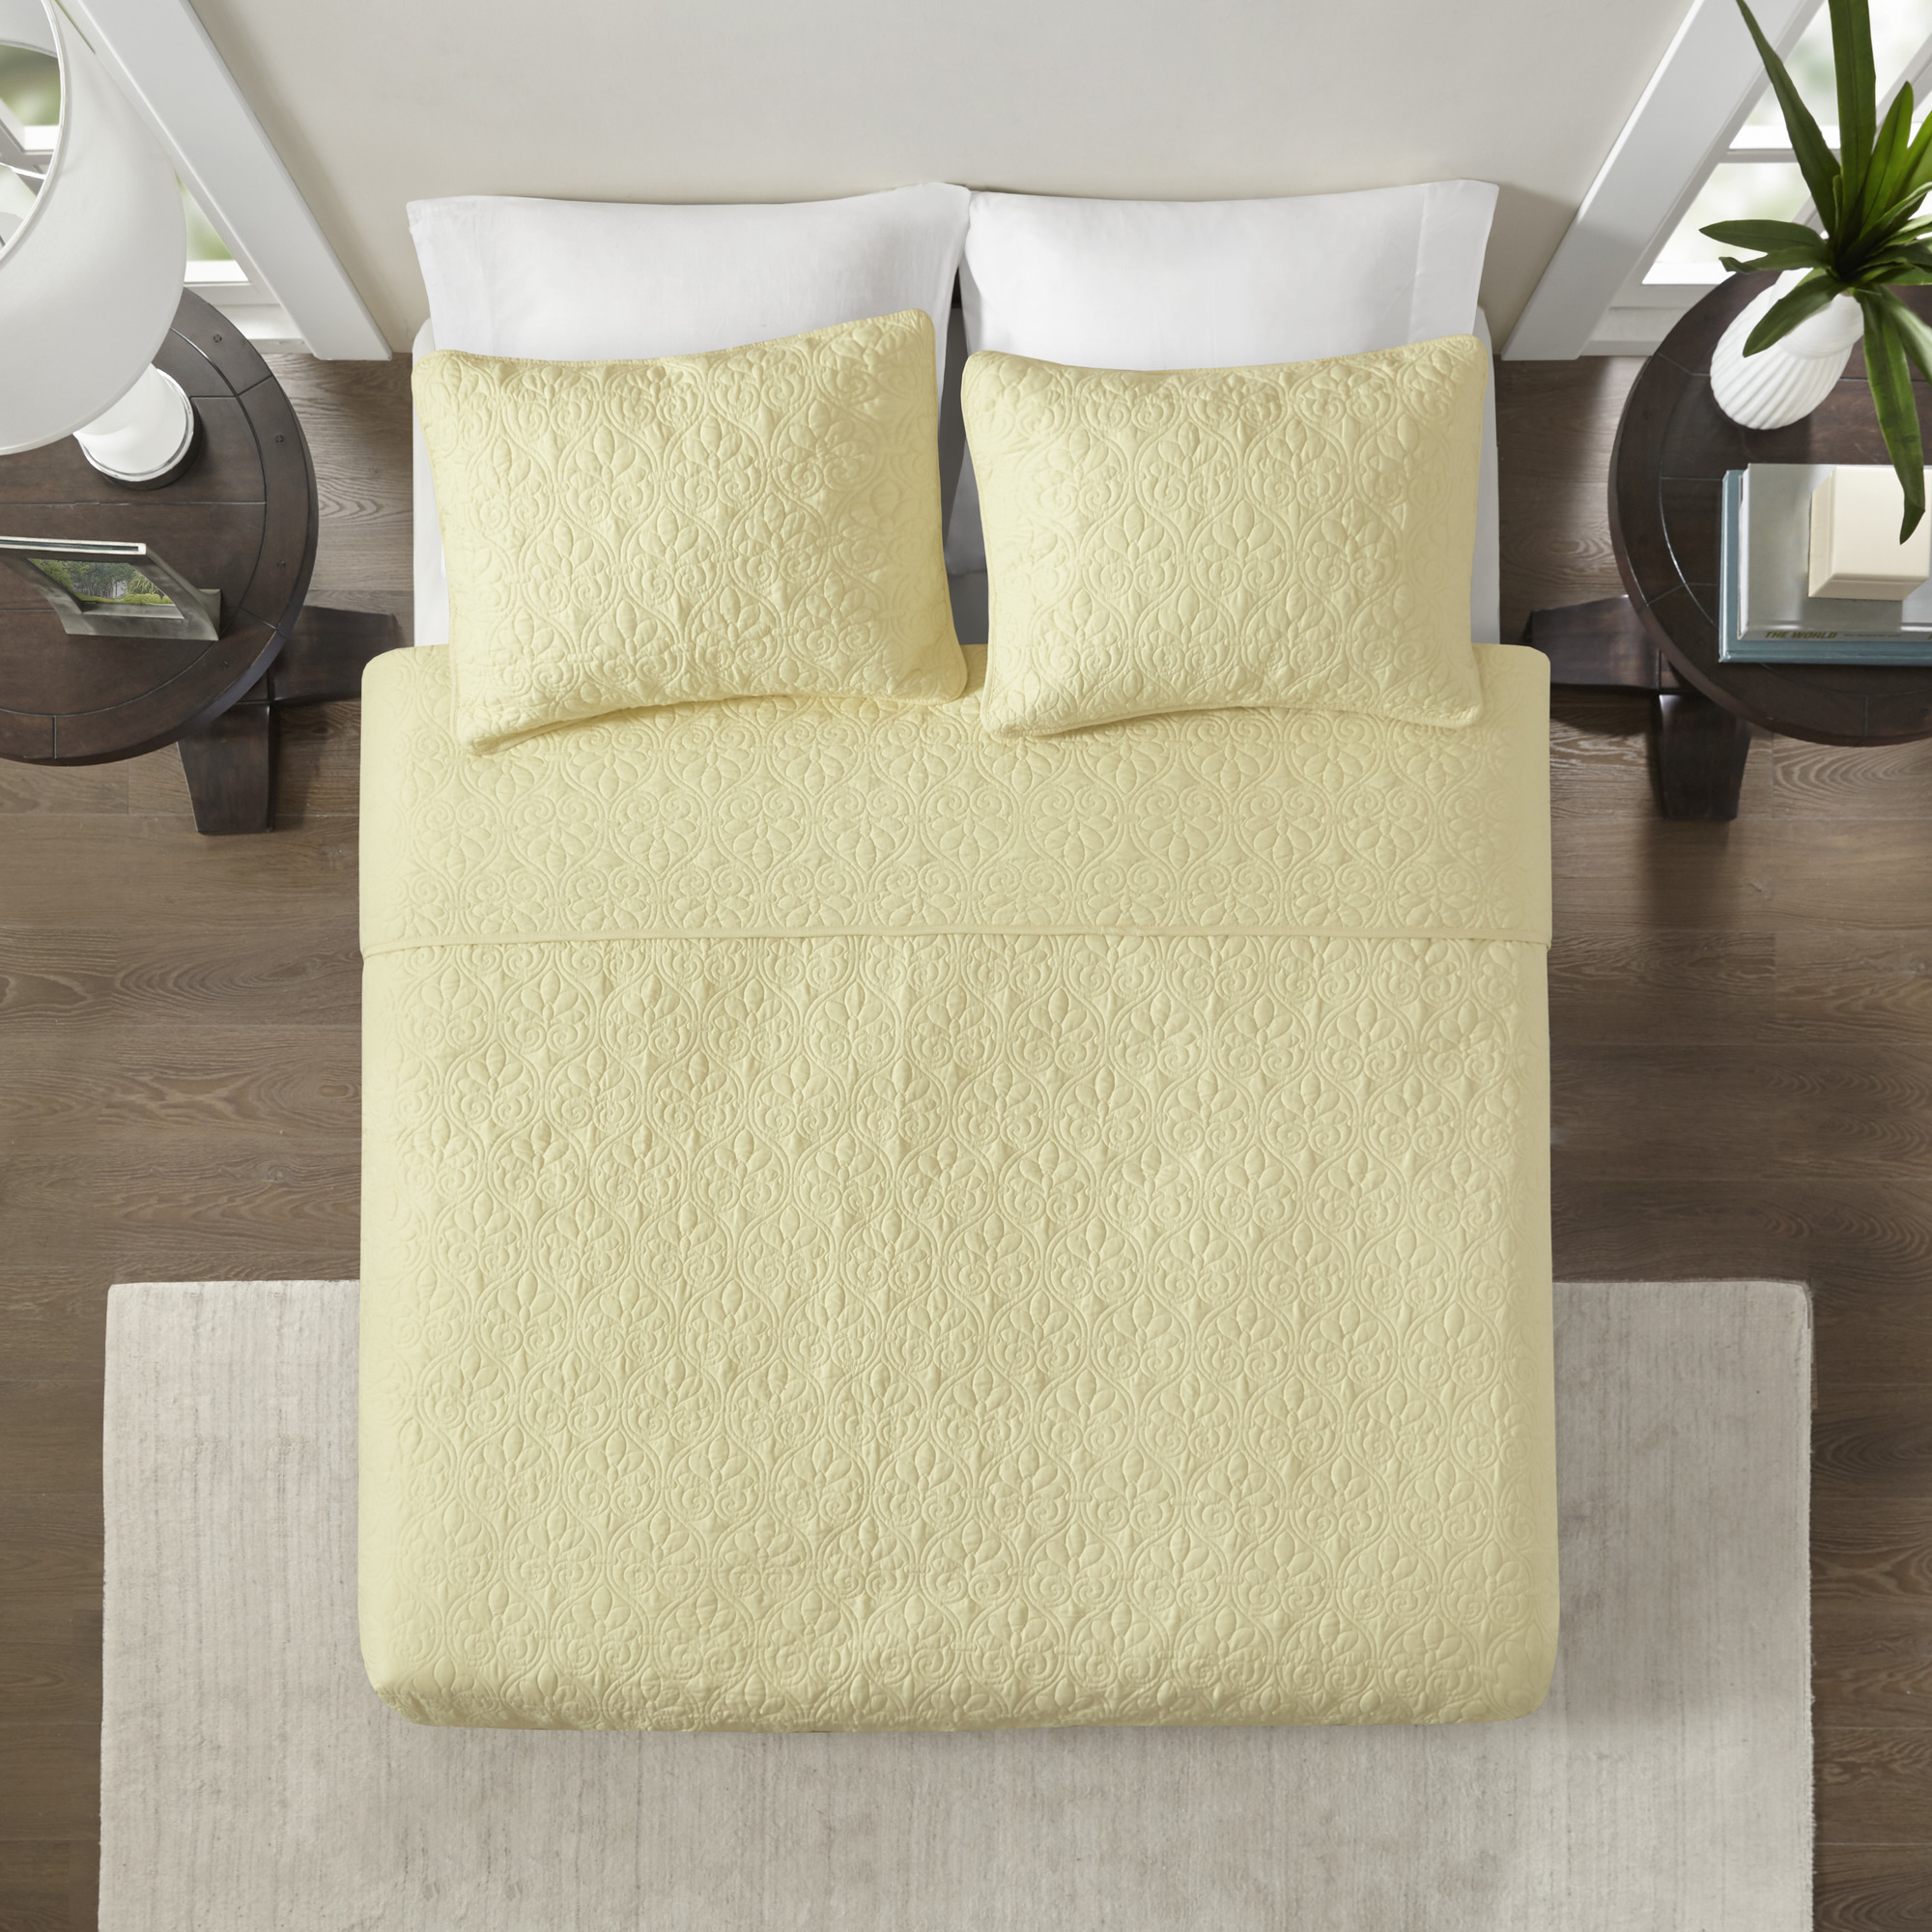 Home Essence Vancouver Super Soft Reversible Coverlet Set, Twin/Twin XL, Yellow - image 5 of 12